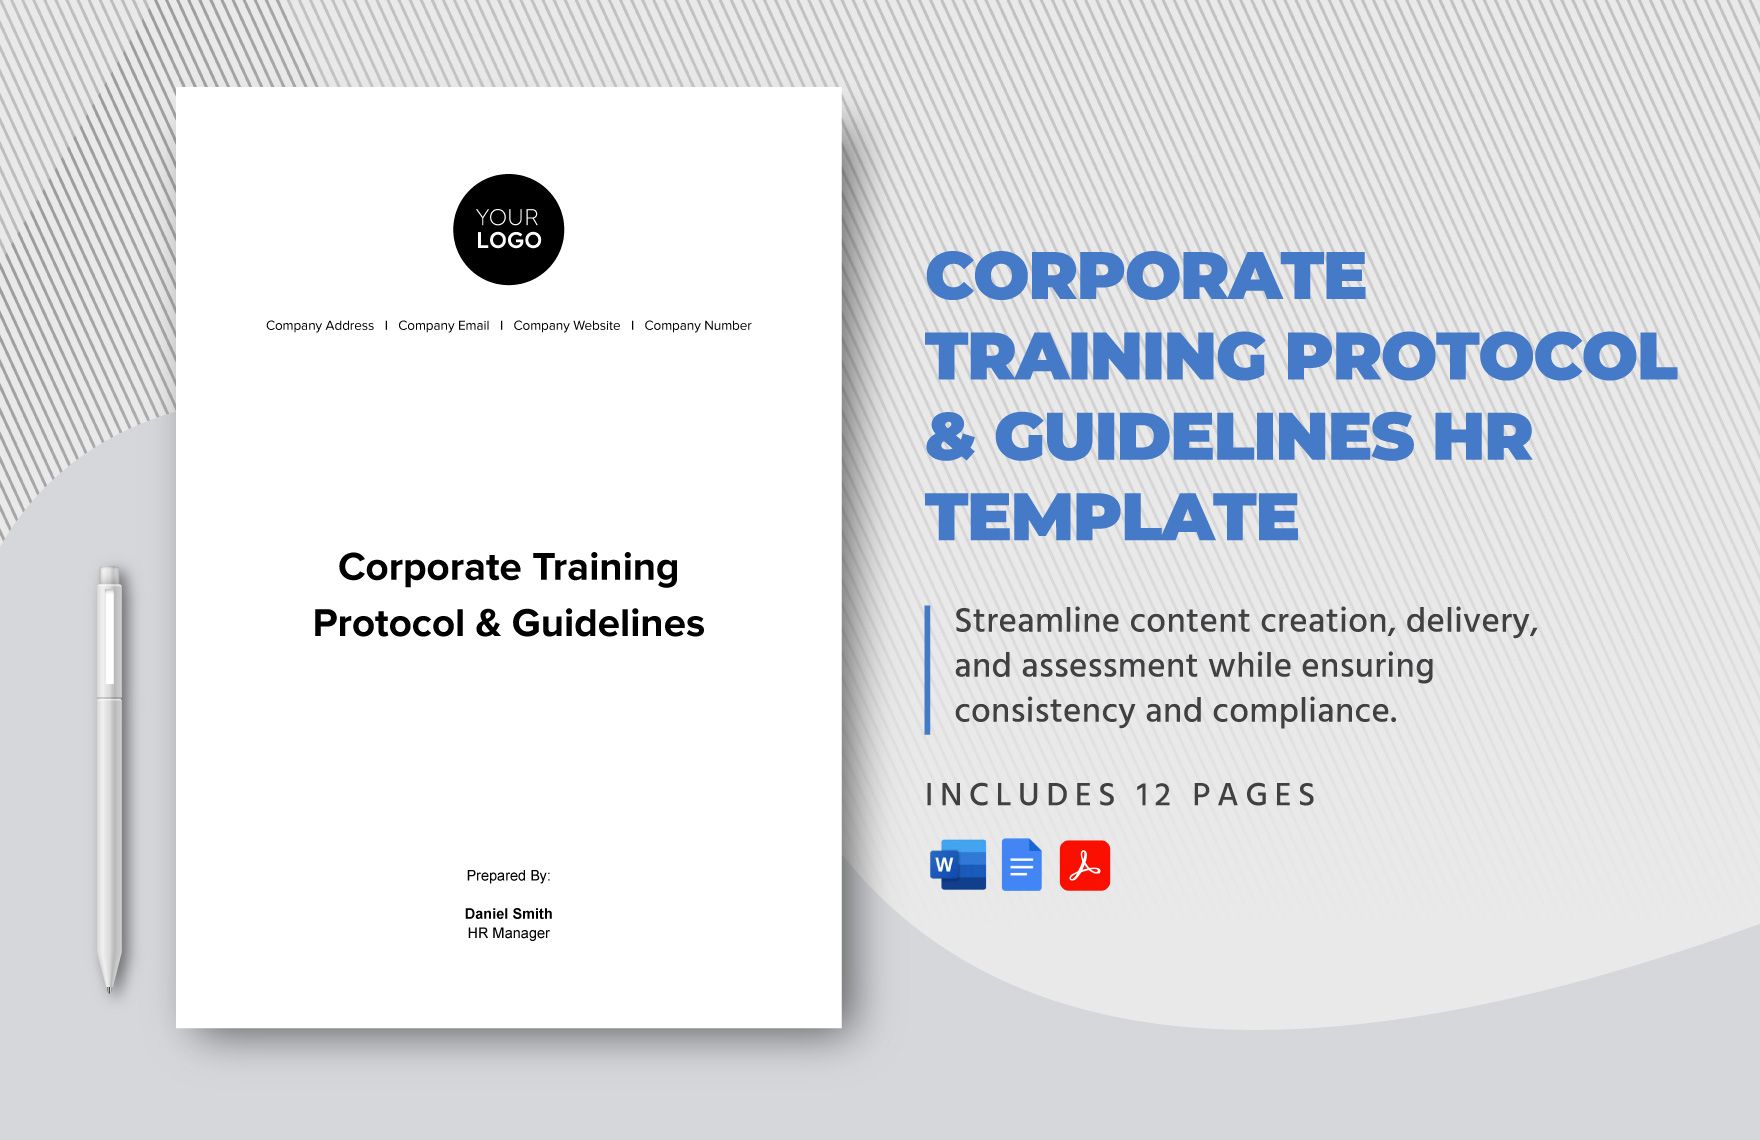 Corporate Training Protocol & Guidelines HR Template in Word, Google Docs, PDF